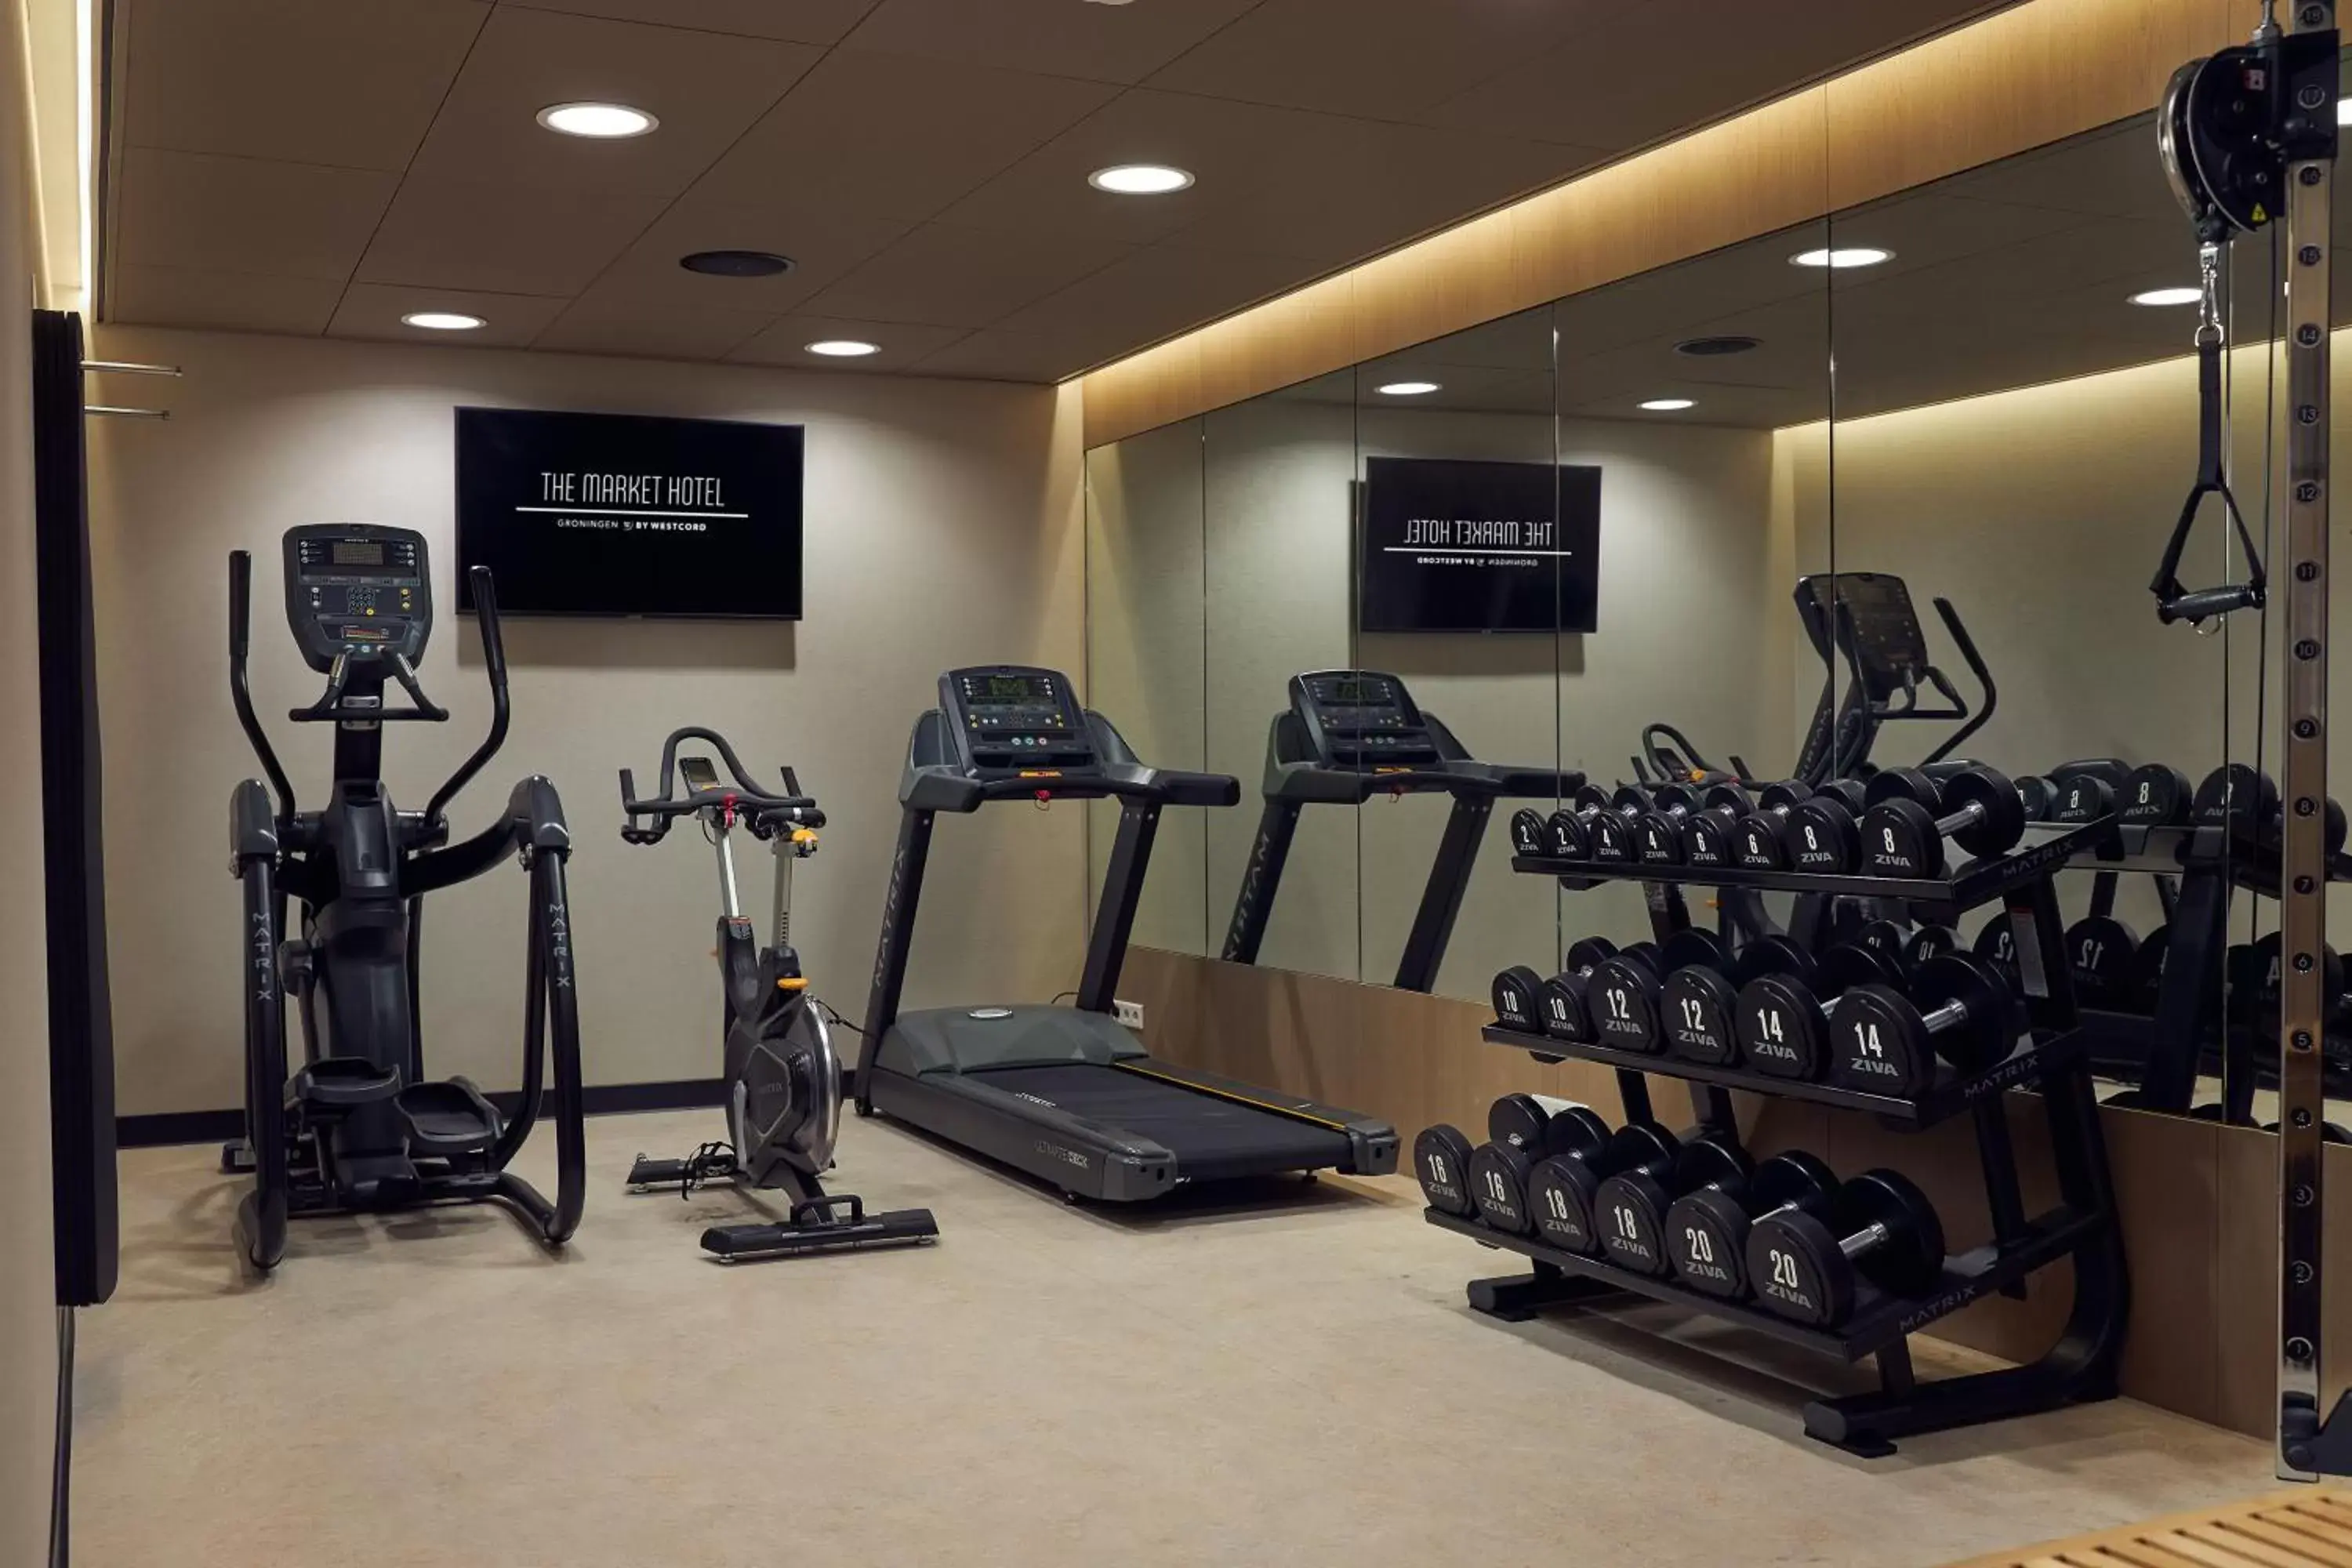 Fitness centre/facilities, Fitness Center/Facilities in The Market Hotel